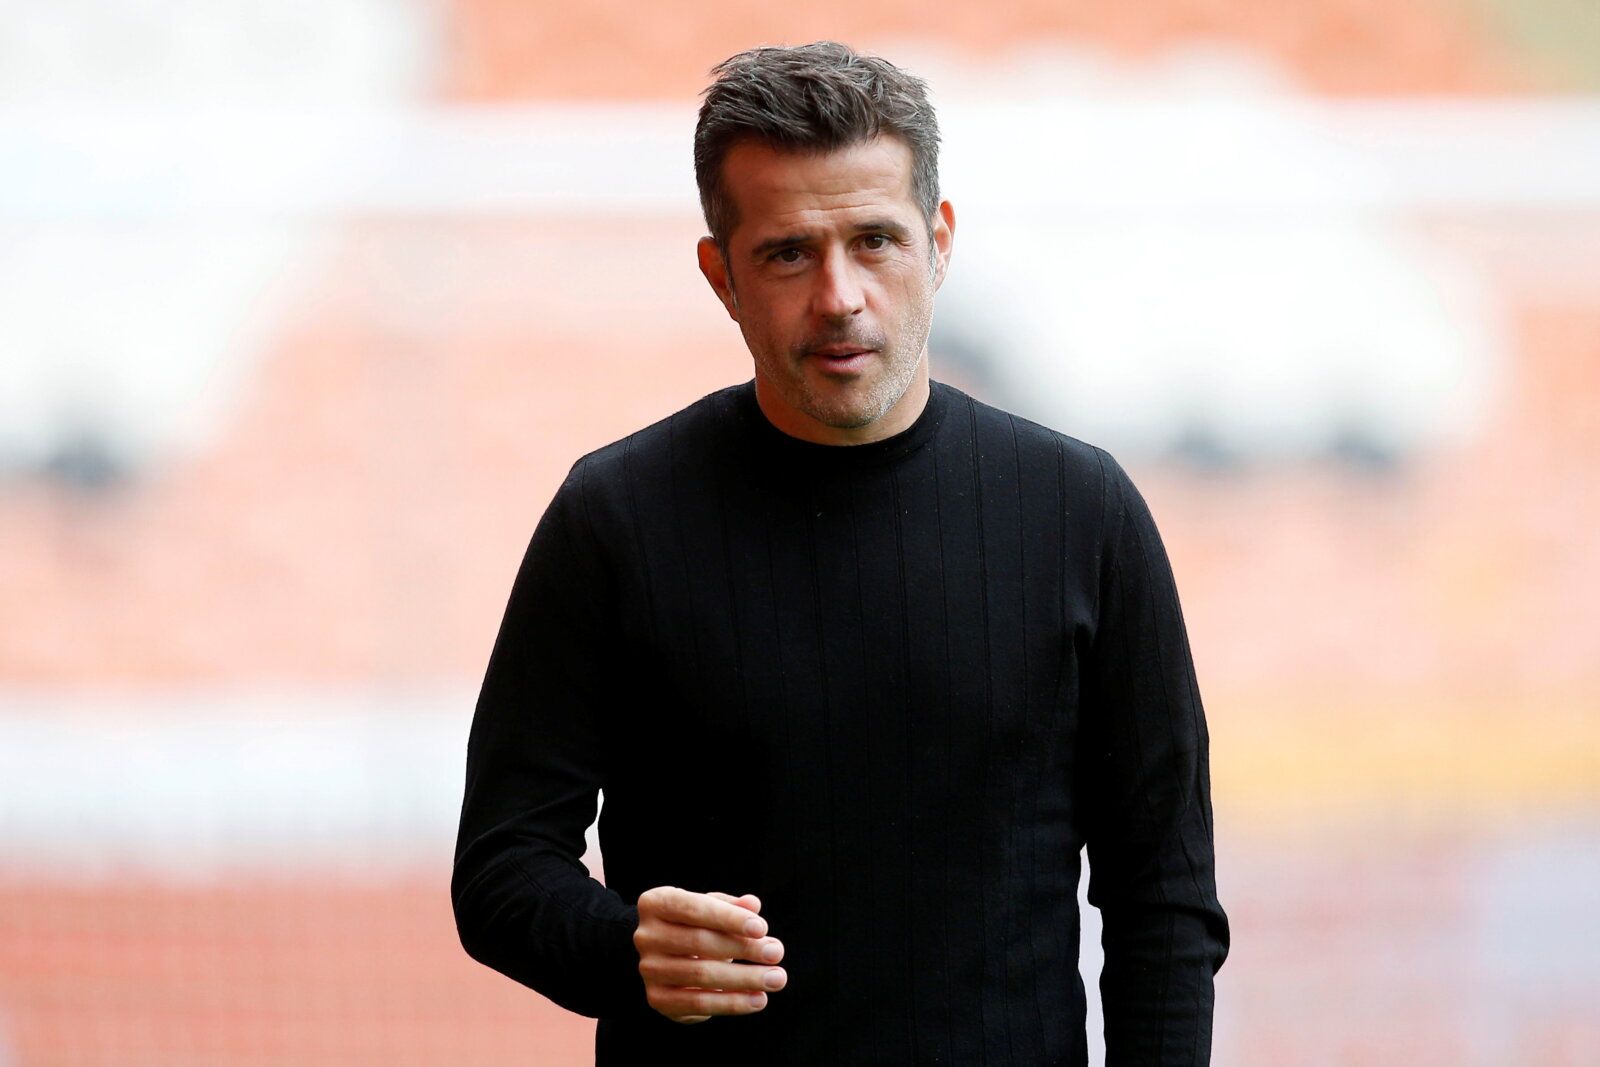 Soccer Football - Championship - Blackpool v Fulham - Bloomfield Road, Blackpool, Britain - September 11, 2021 Fulham Manager Marco Silva ahead of the match  Action Images/Craig Brough  EDITORIAL USE ONLY. No use with unauthorized audio, video, data, fixture lists, club/league logos or "live" services. Online in-match use limited to 75 images, no video emulation. No use in betting, games or single club/league/player publications.  Please contact your account representative for further details.